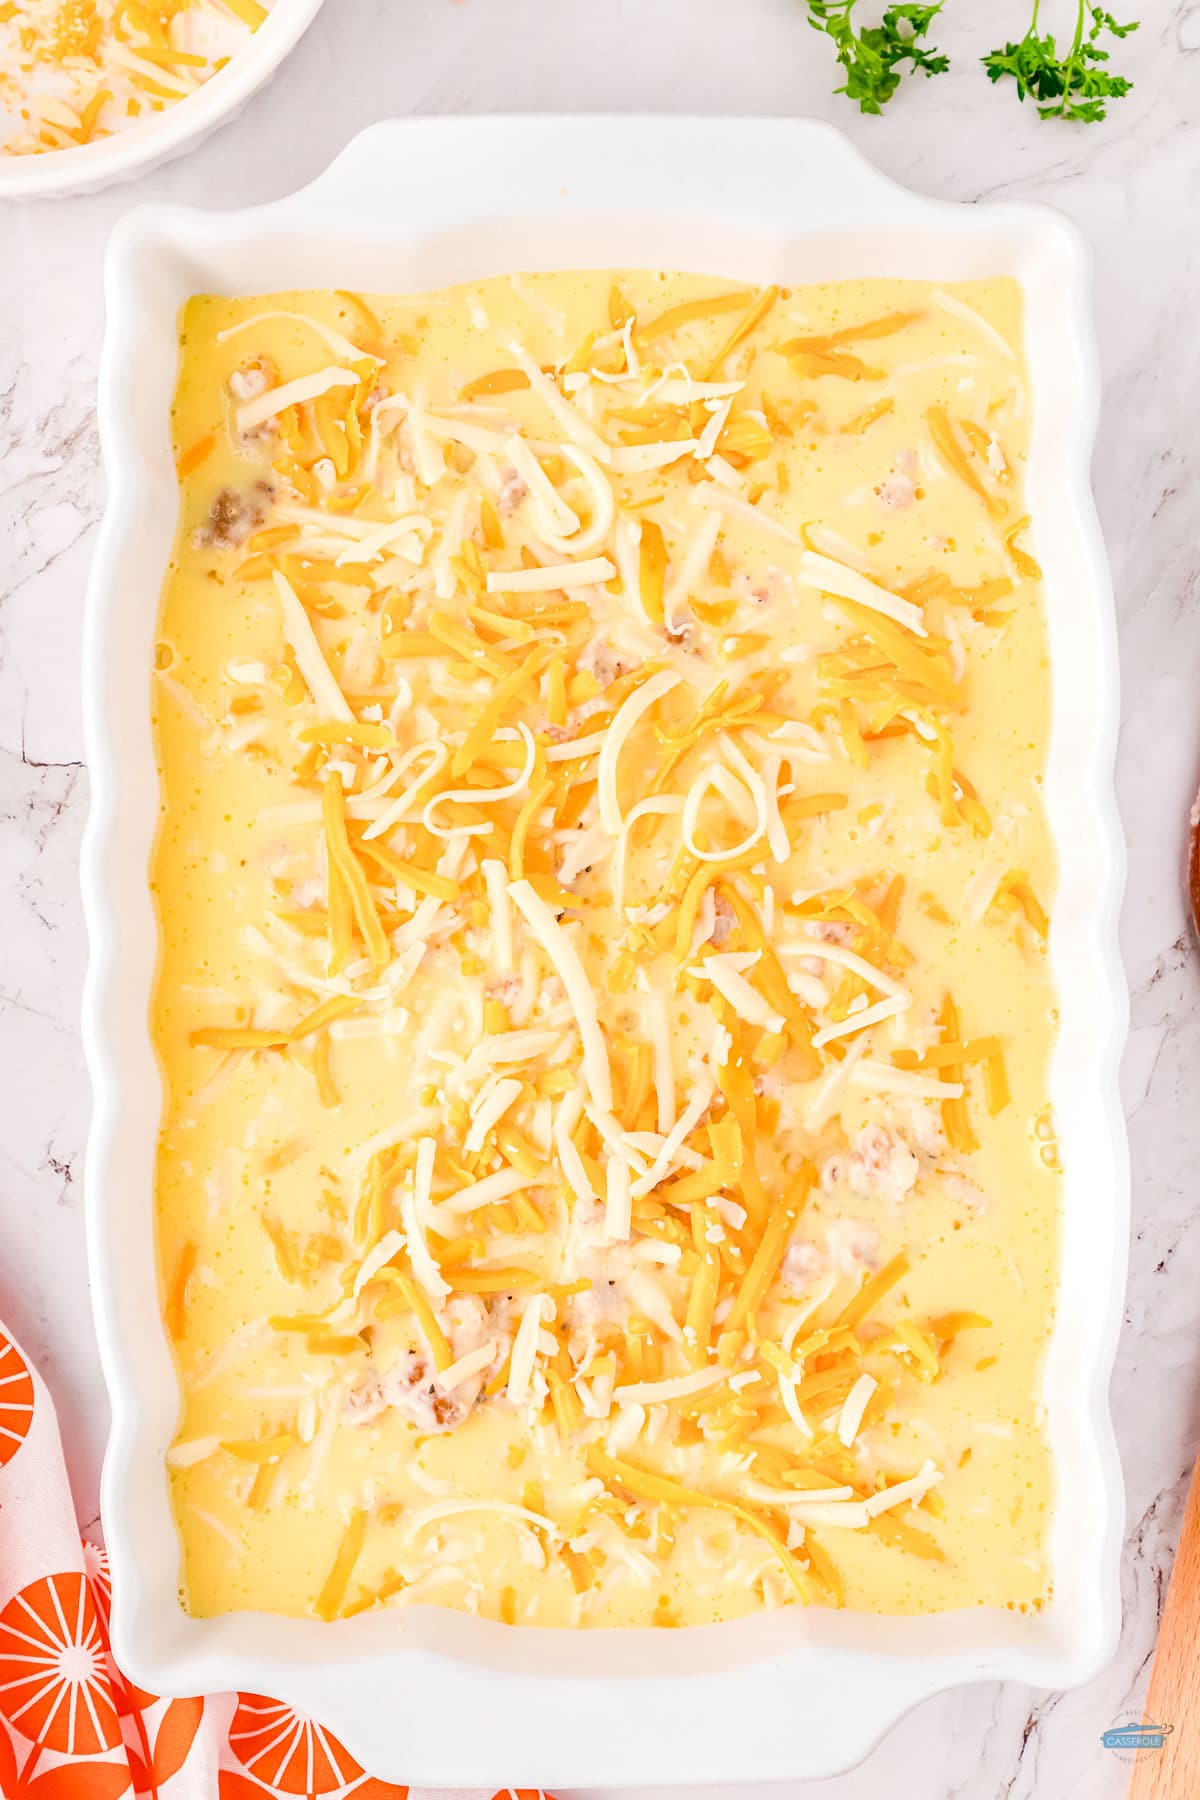 unbaked casserole in a white dish with shredded cheese on top